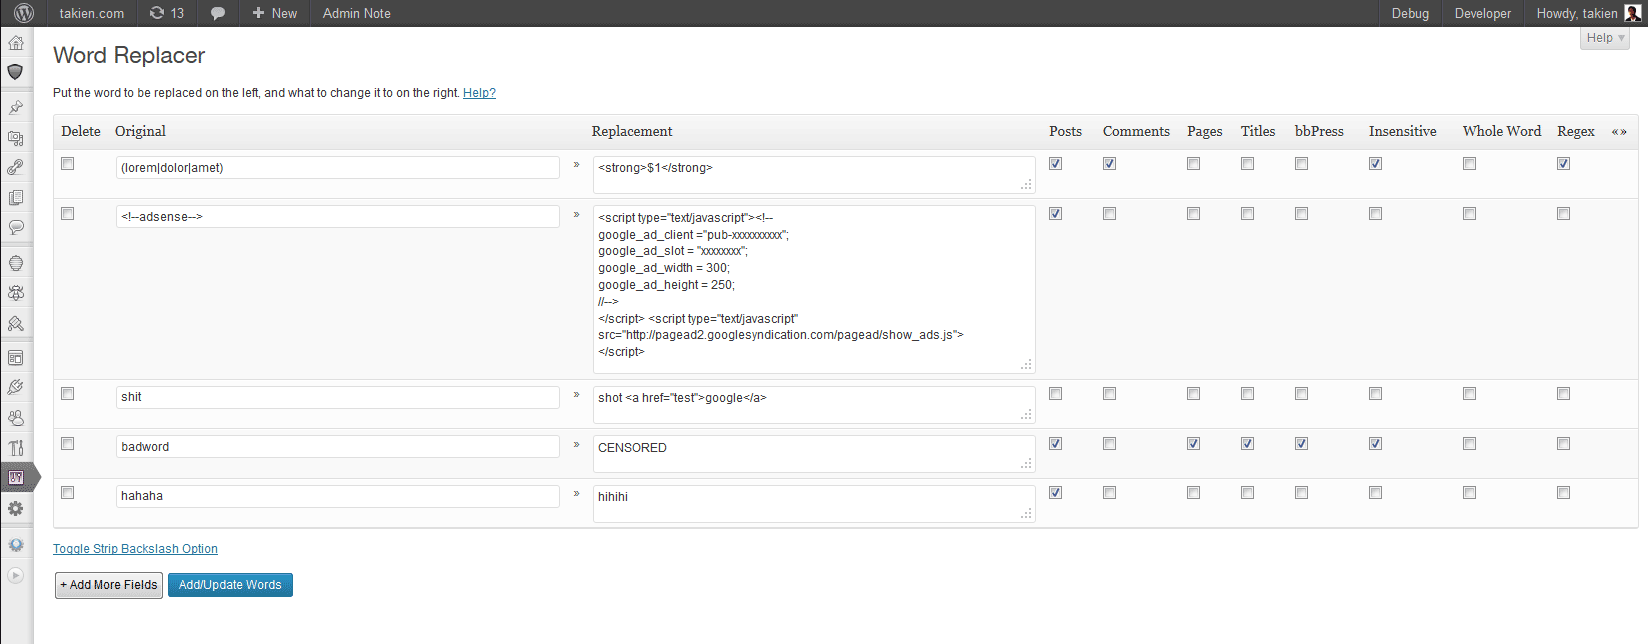 Settings page where you can add/remove your words.